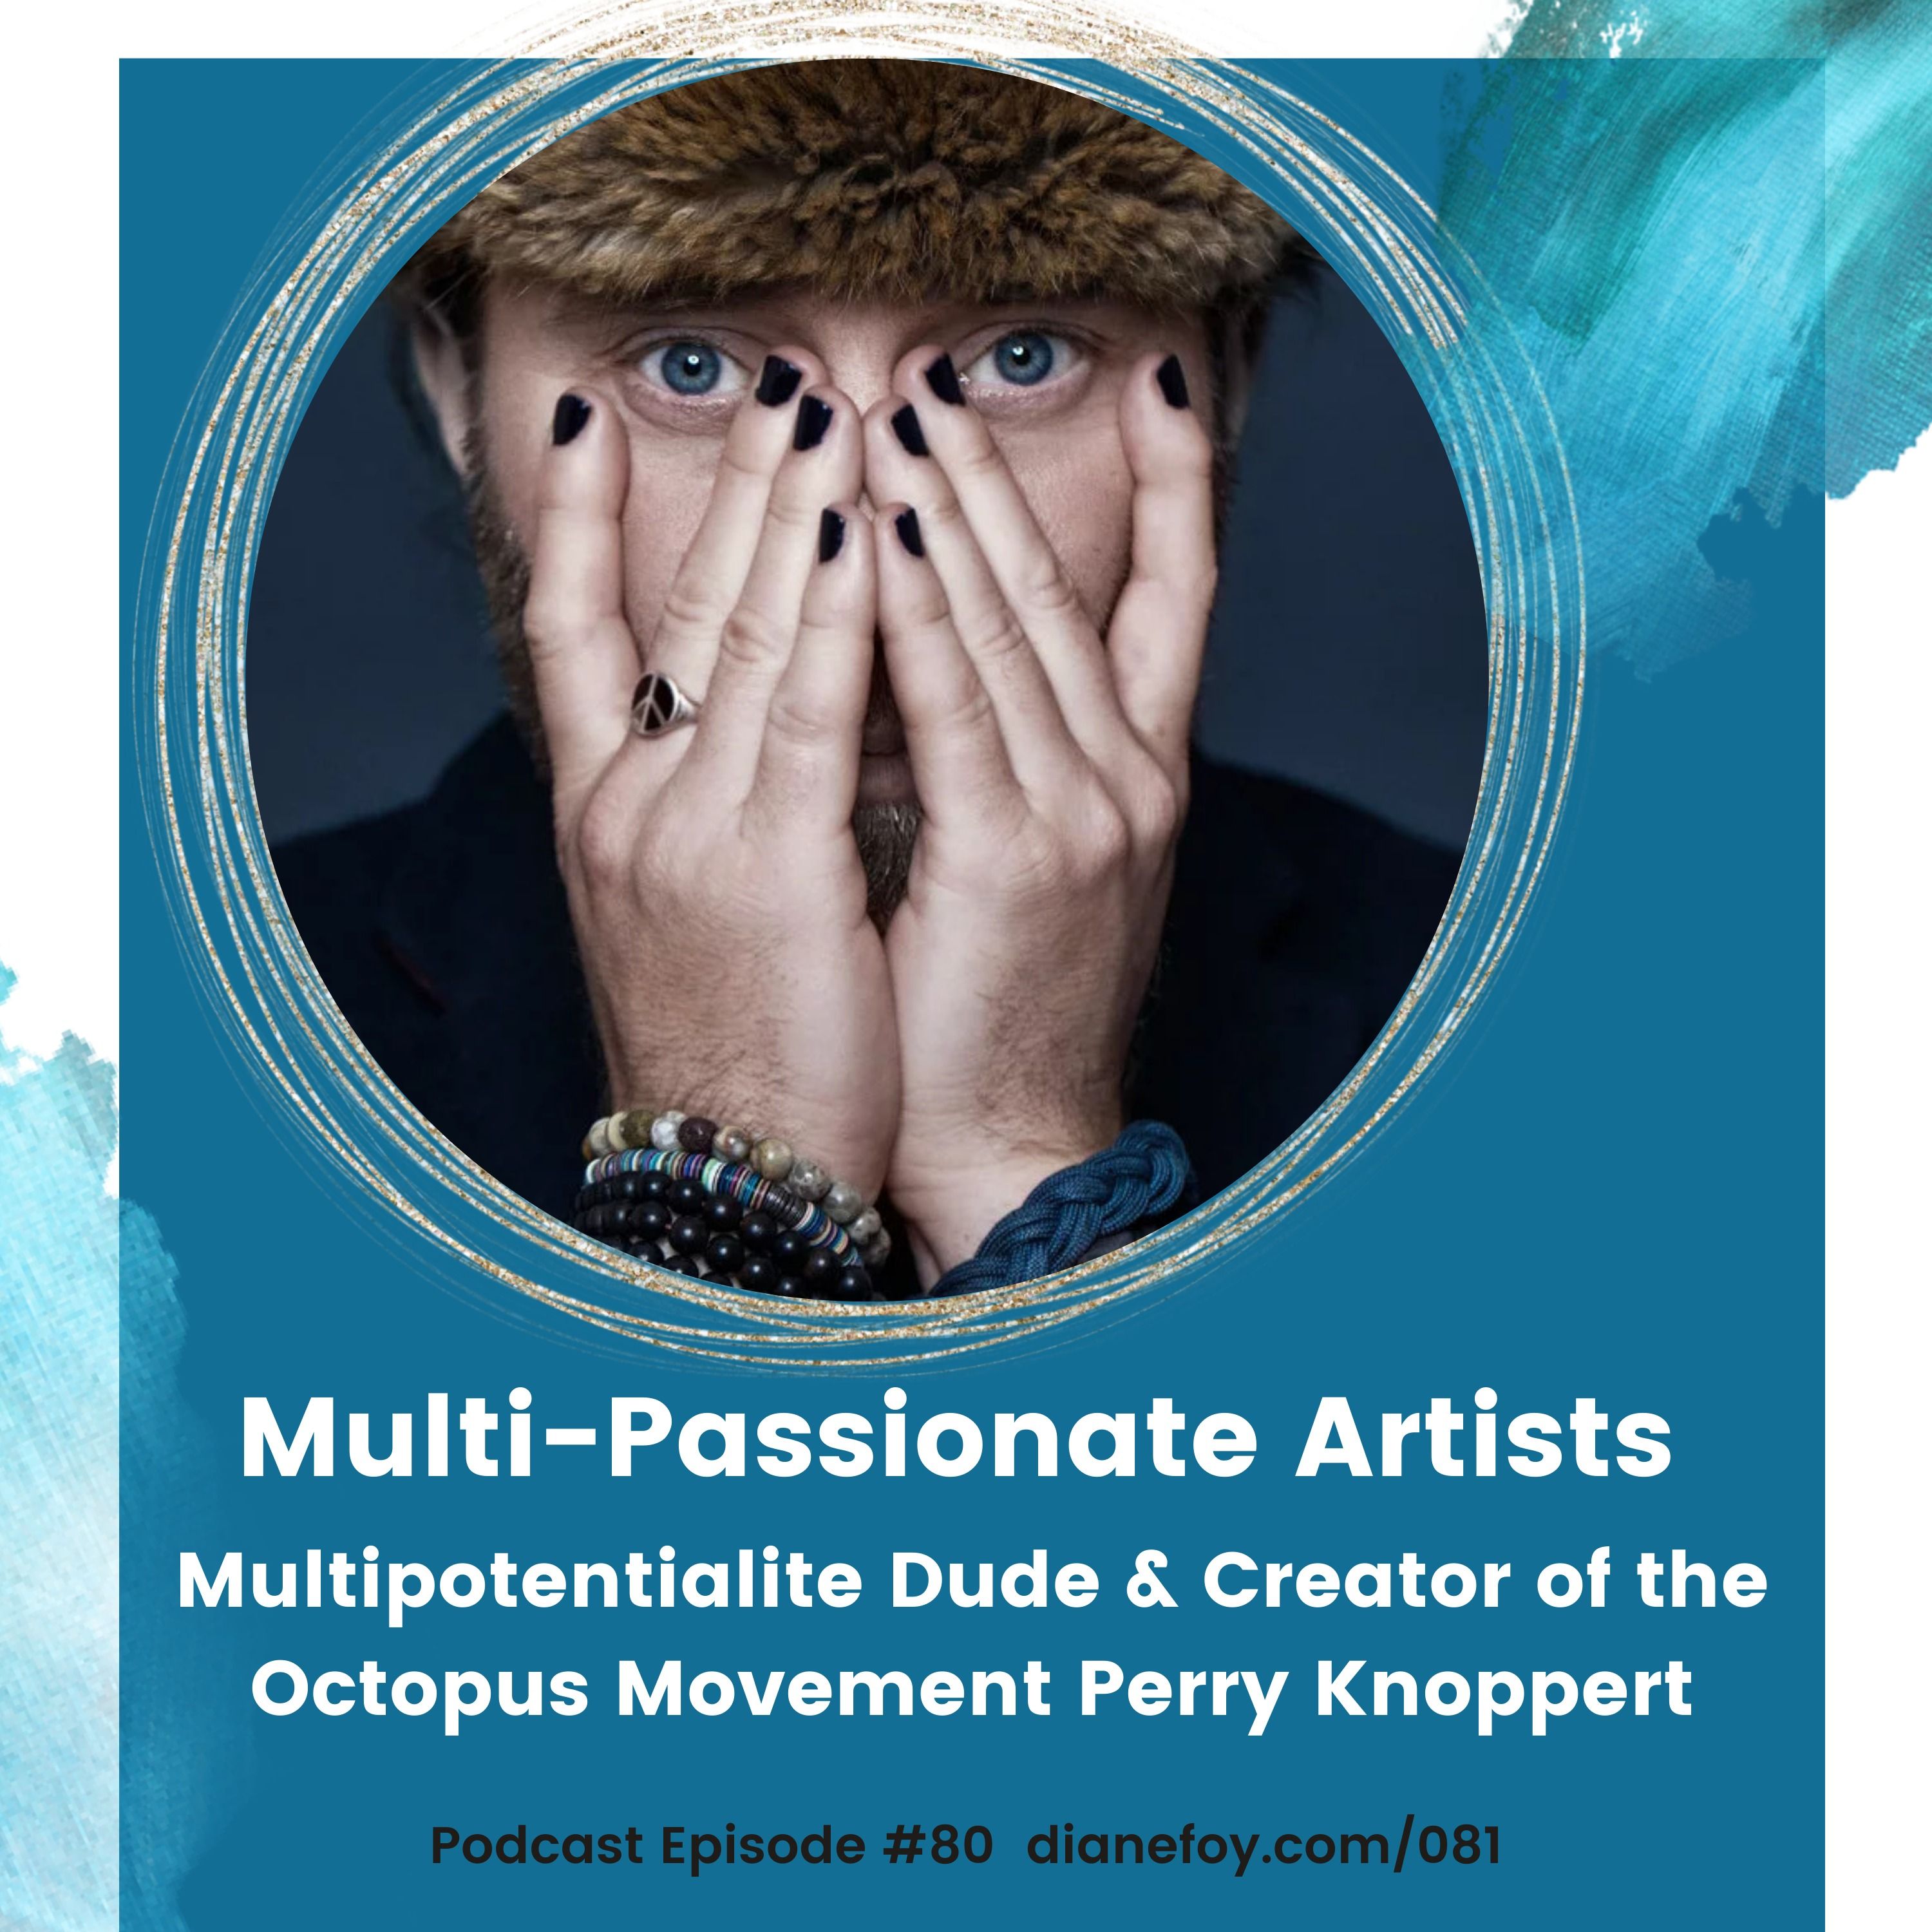 Multipotentialite Dude & Creator of the Octopus Movement Perry Knoppert hero artwork